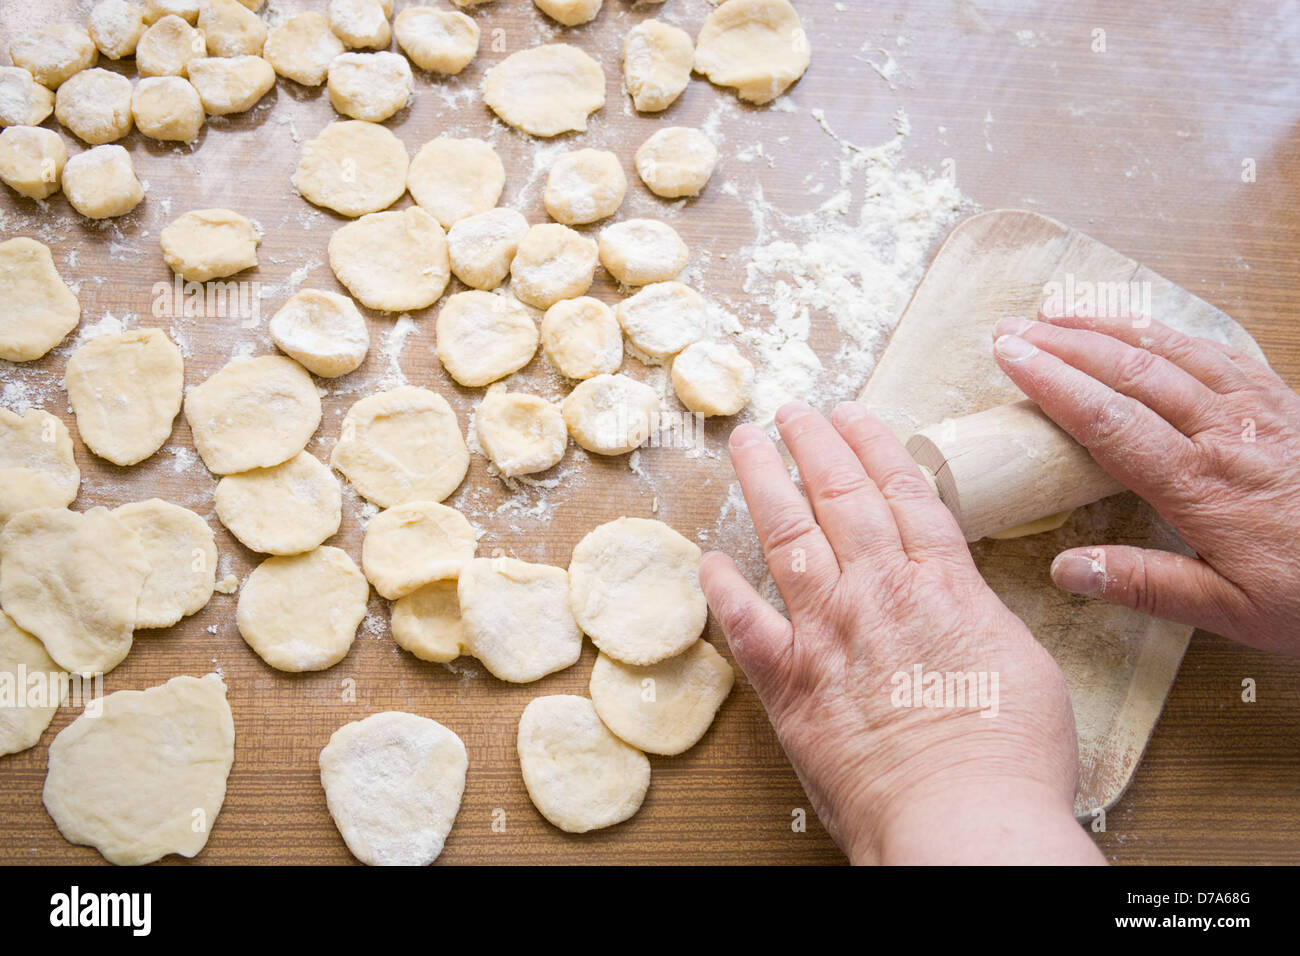 Grandma's hands roll out the dough on wooden table Stock Photo